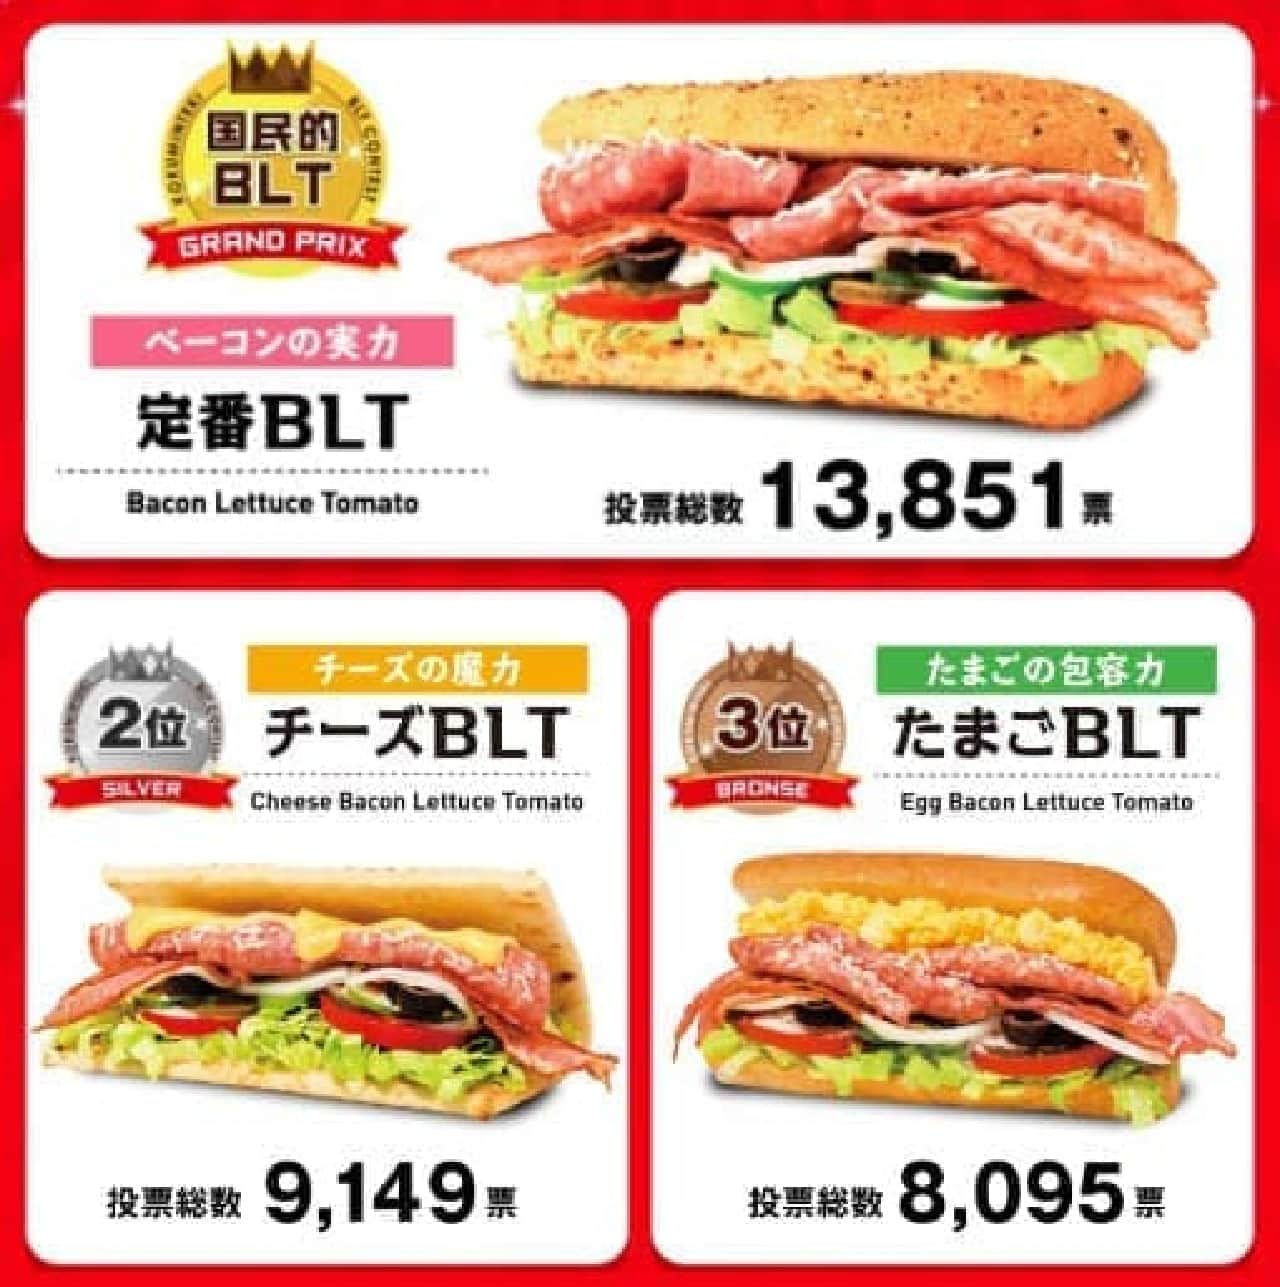 Subway BLT popularity poll results